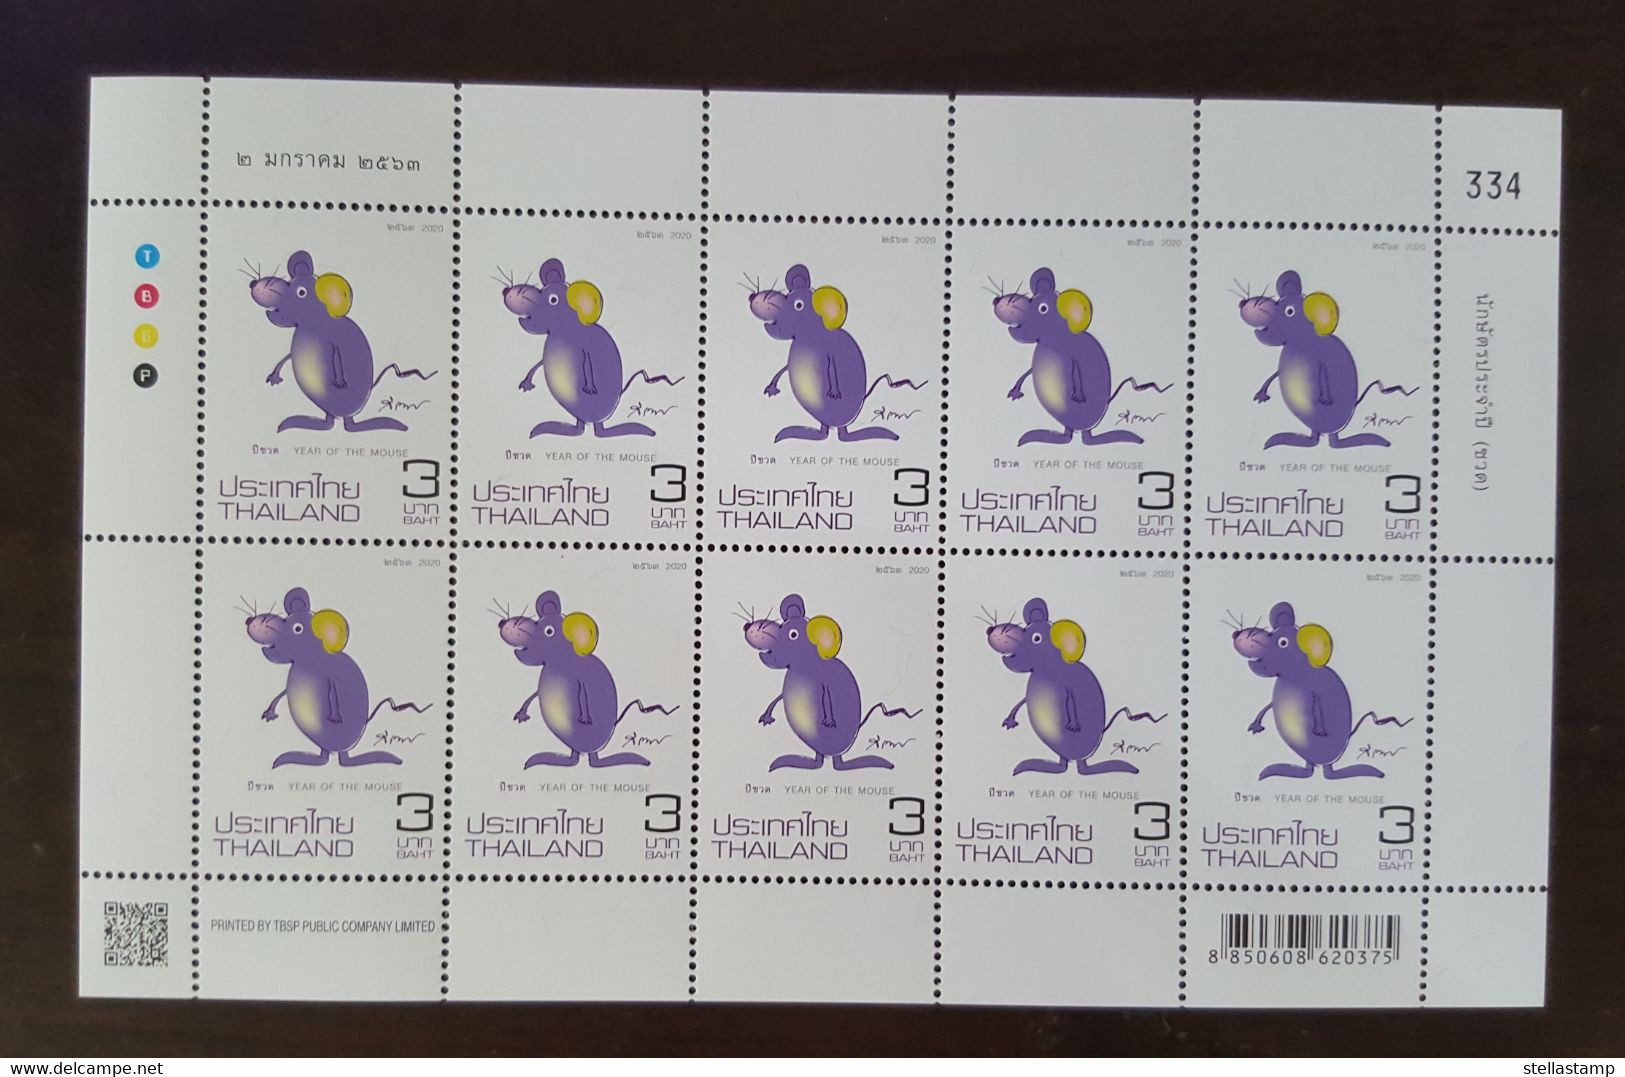 Thailand Stamp FS 2020 Zodiac Year Of The Mouse - Thailand